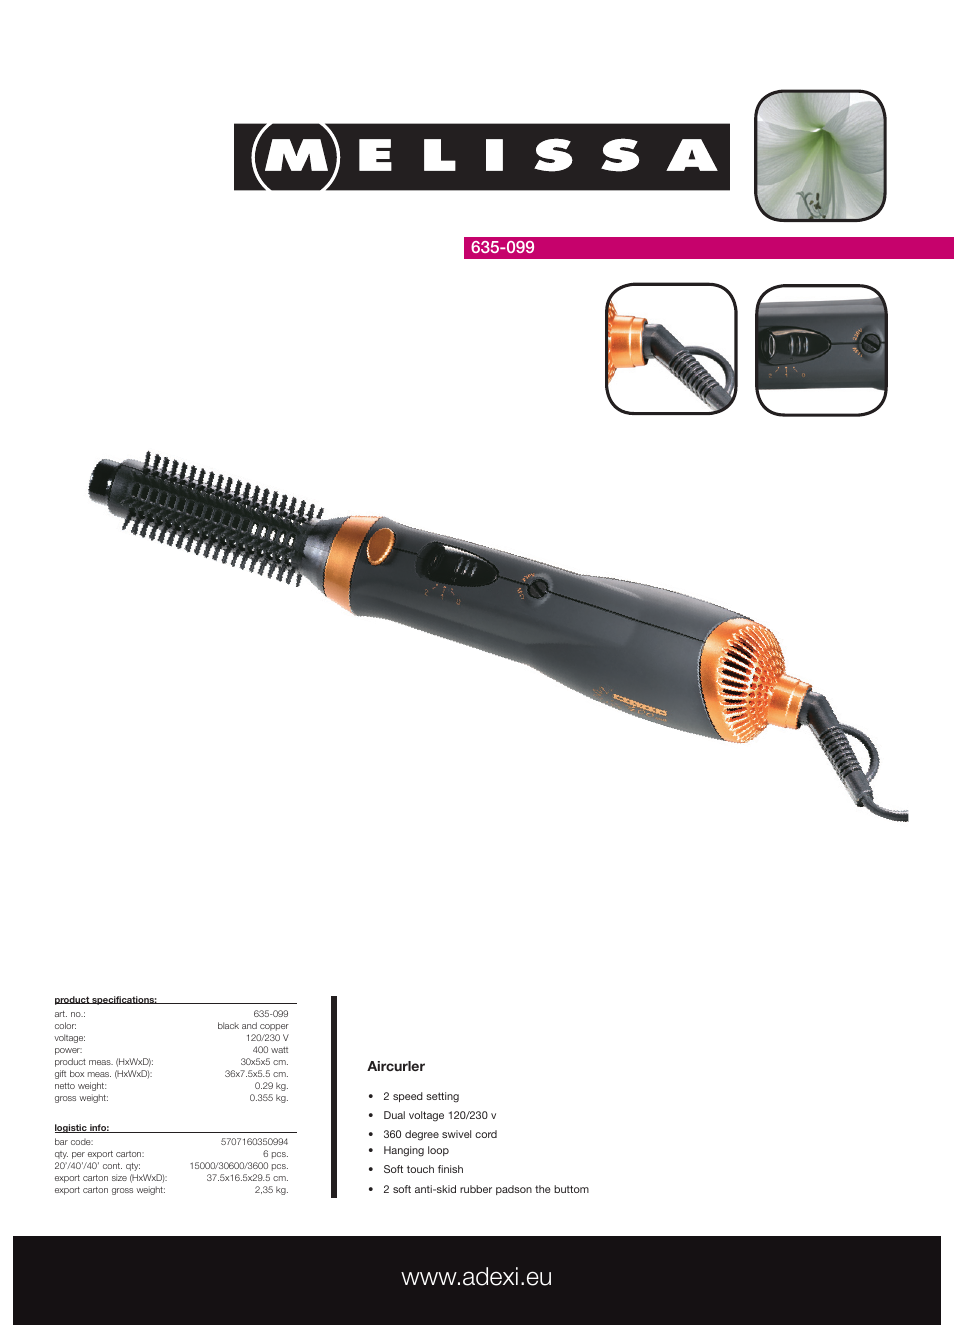 Aircurler 635-099